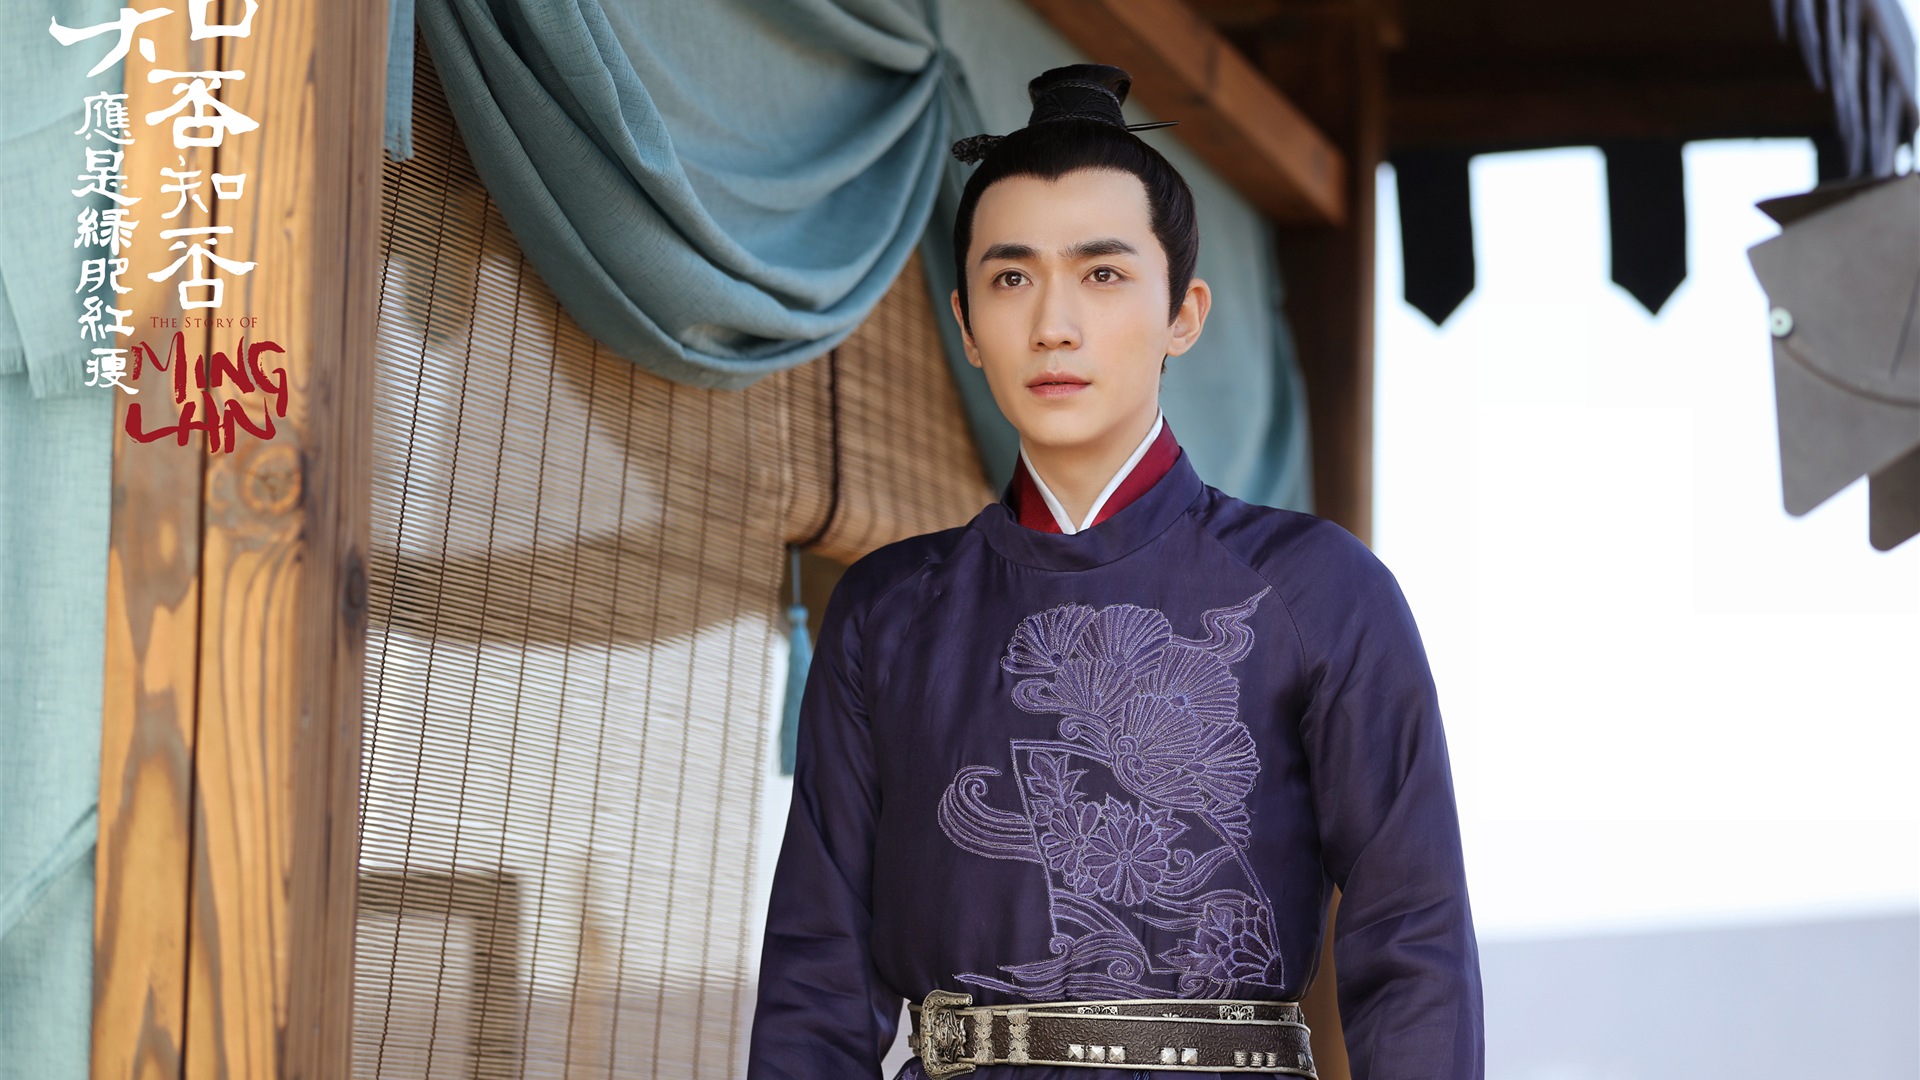 The Story Of MingLan, TV series HD wallpapers #24 - 1920x1080